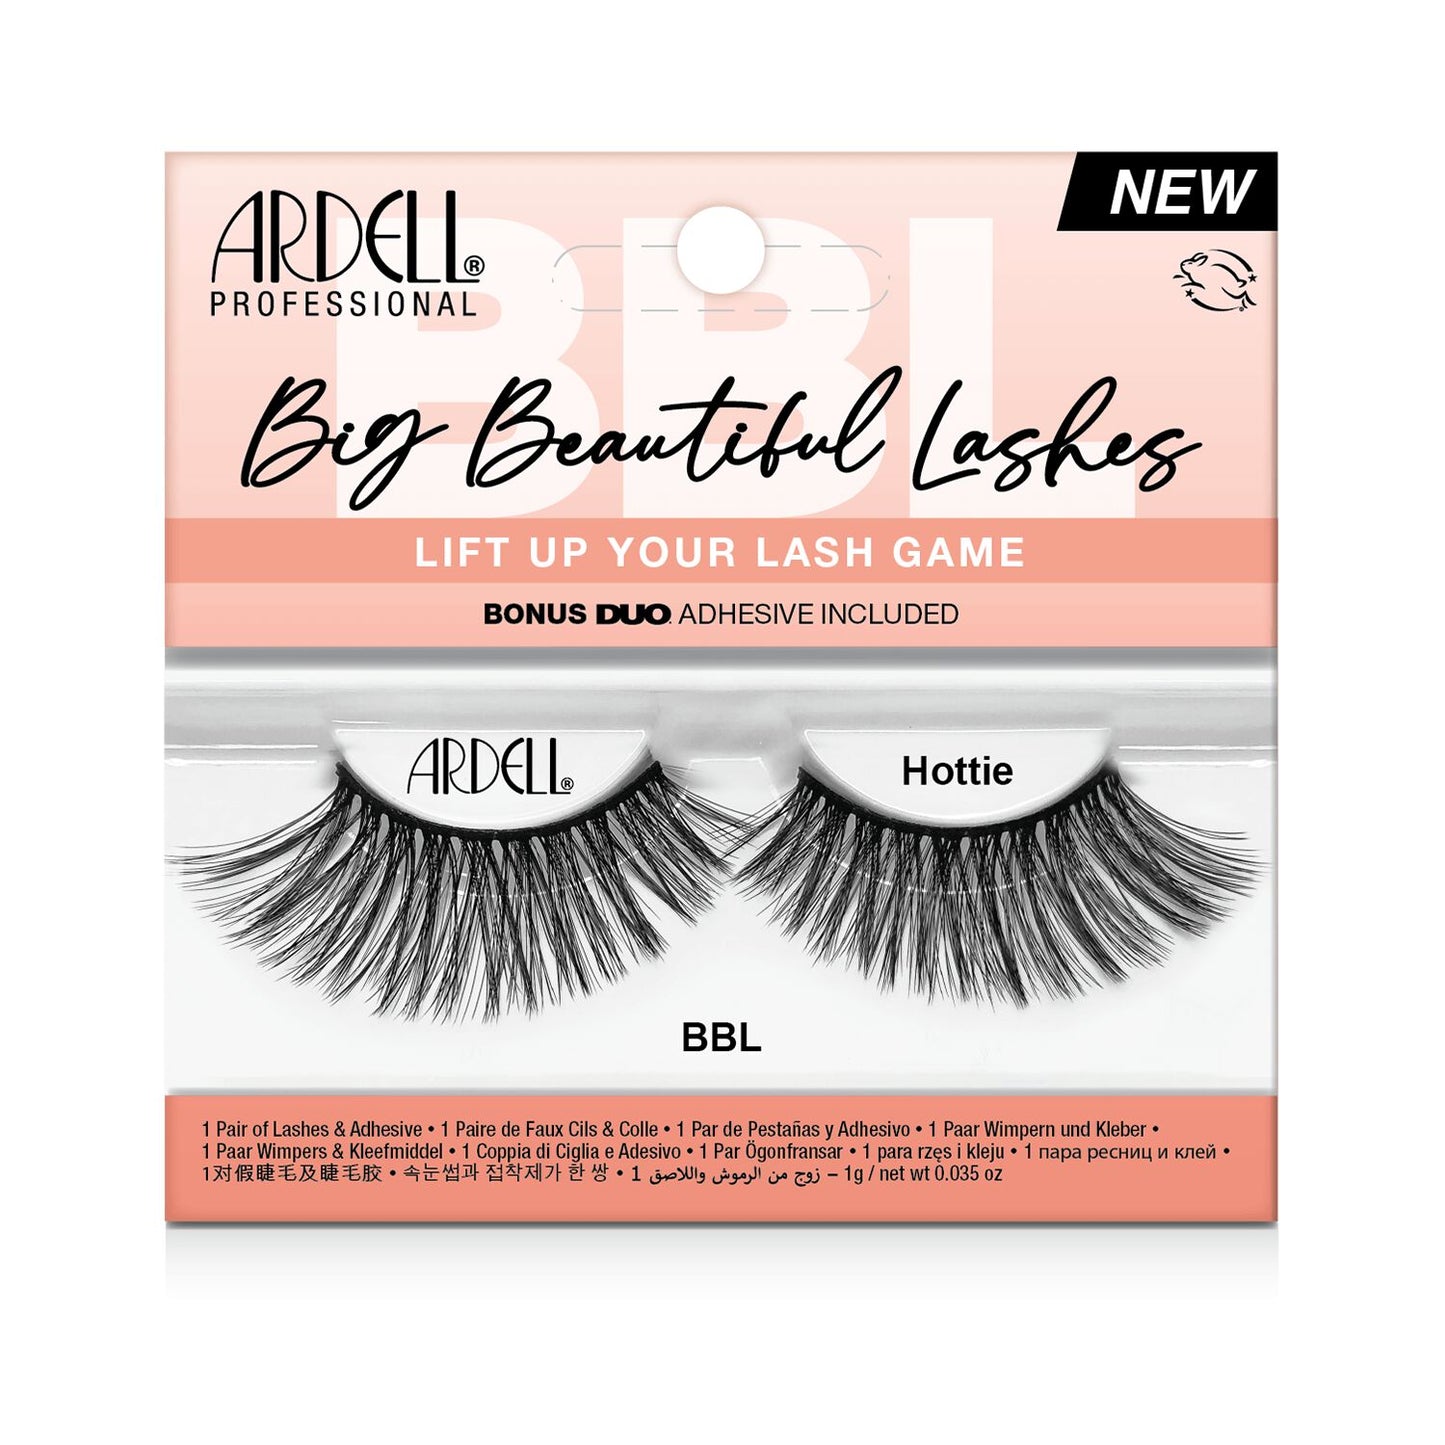 Big Beautiful Lashes  by   Ardell Hottie Big Beautiful Lashes